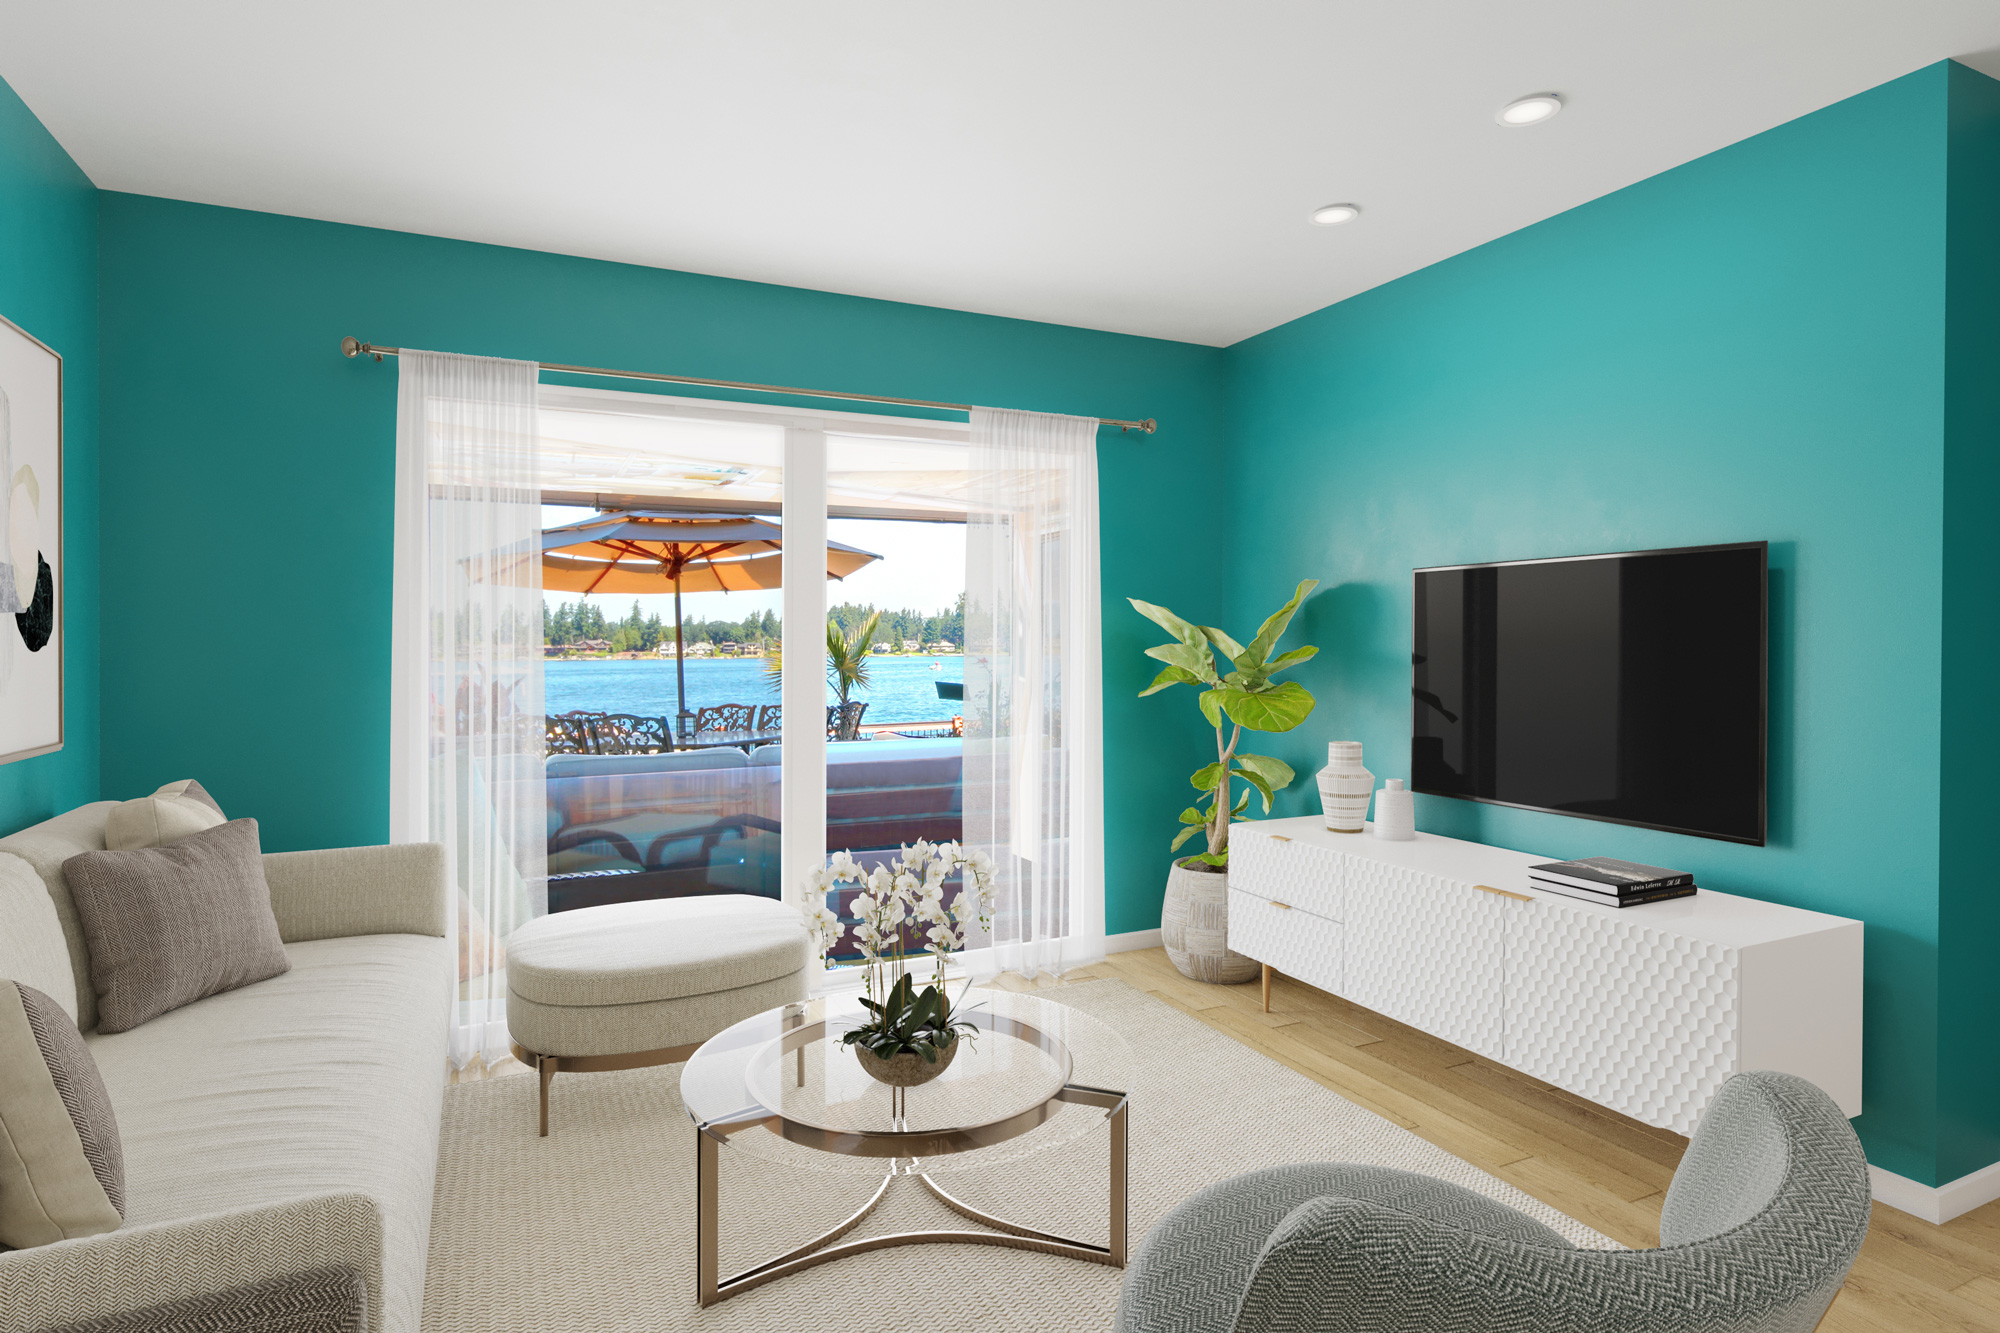 Small cozy beach side living room transformed with teal walls